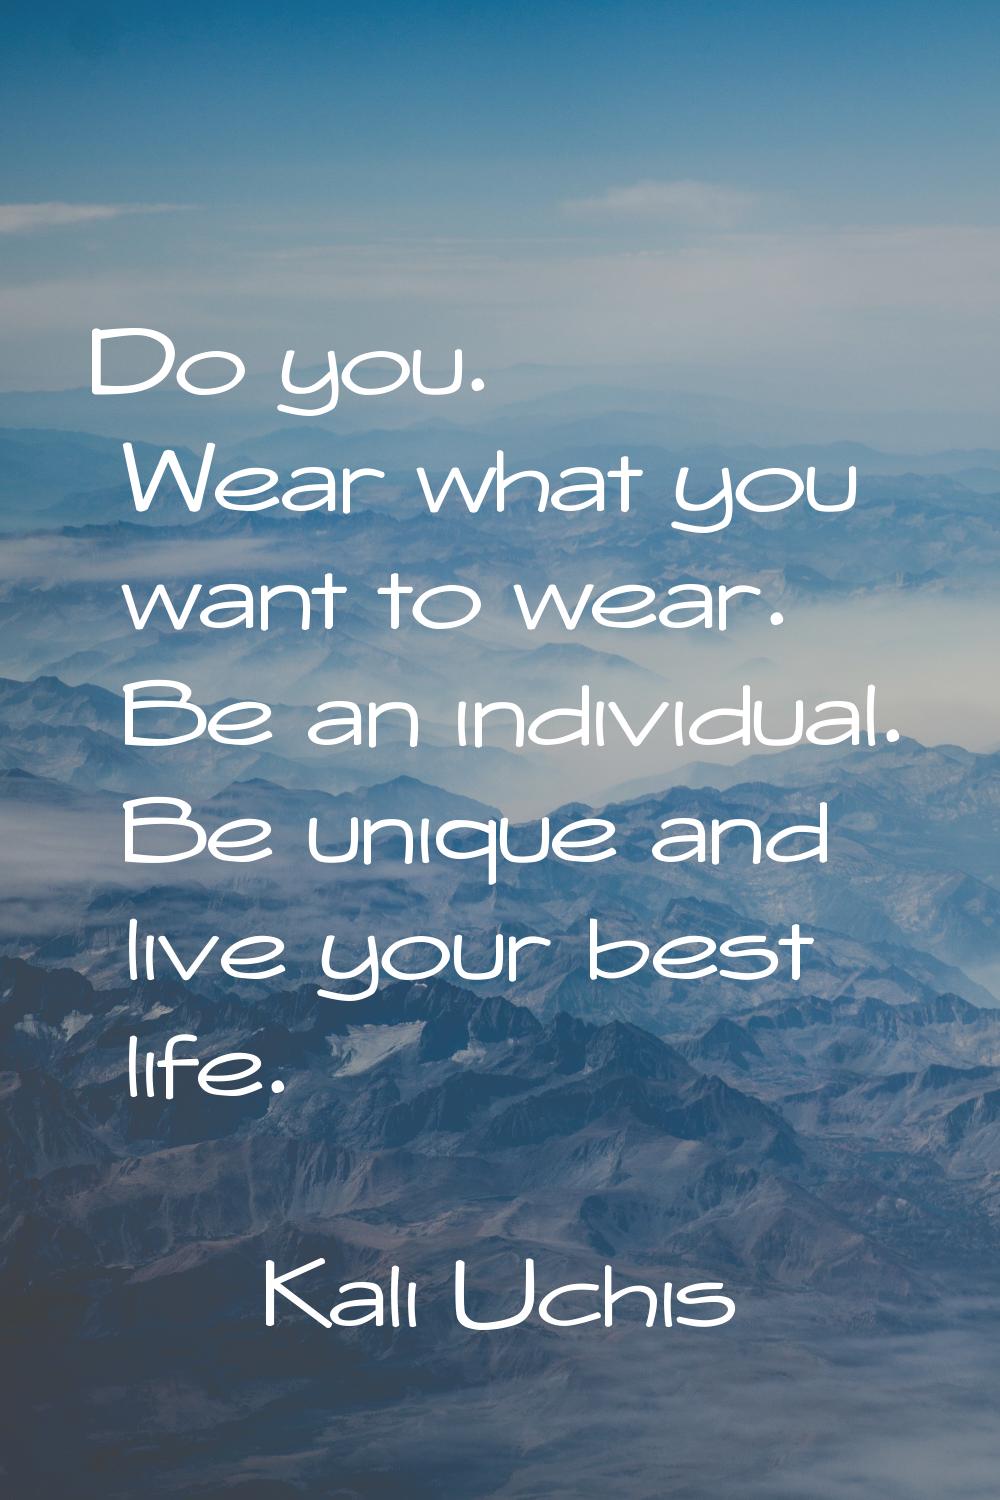 Do you. Wear what you want to wear. Be an individual. Be unique and live your best life.